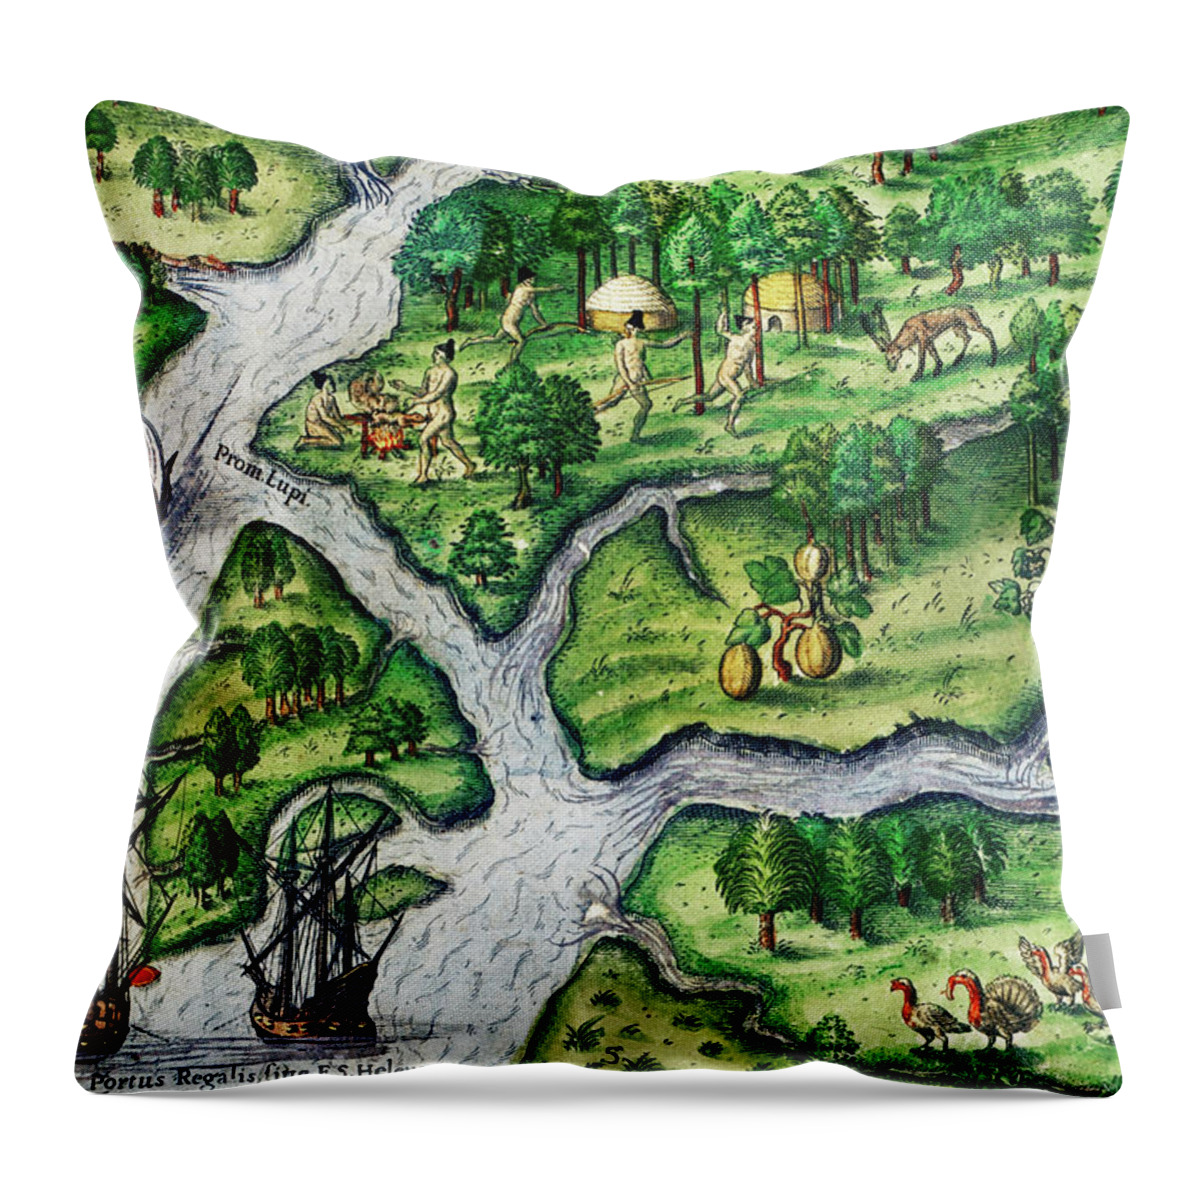 Port Royal Throw Pillow featuring the drawing Port Royal, South Carolina illustration from Grand voyages 1596 #1 by Theodor de Bry